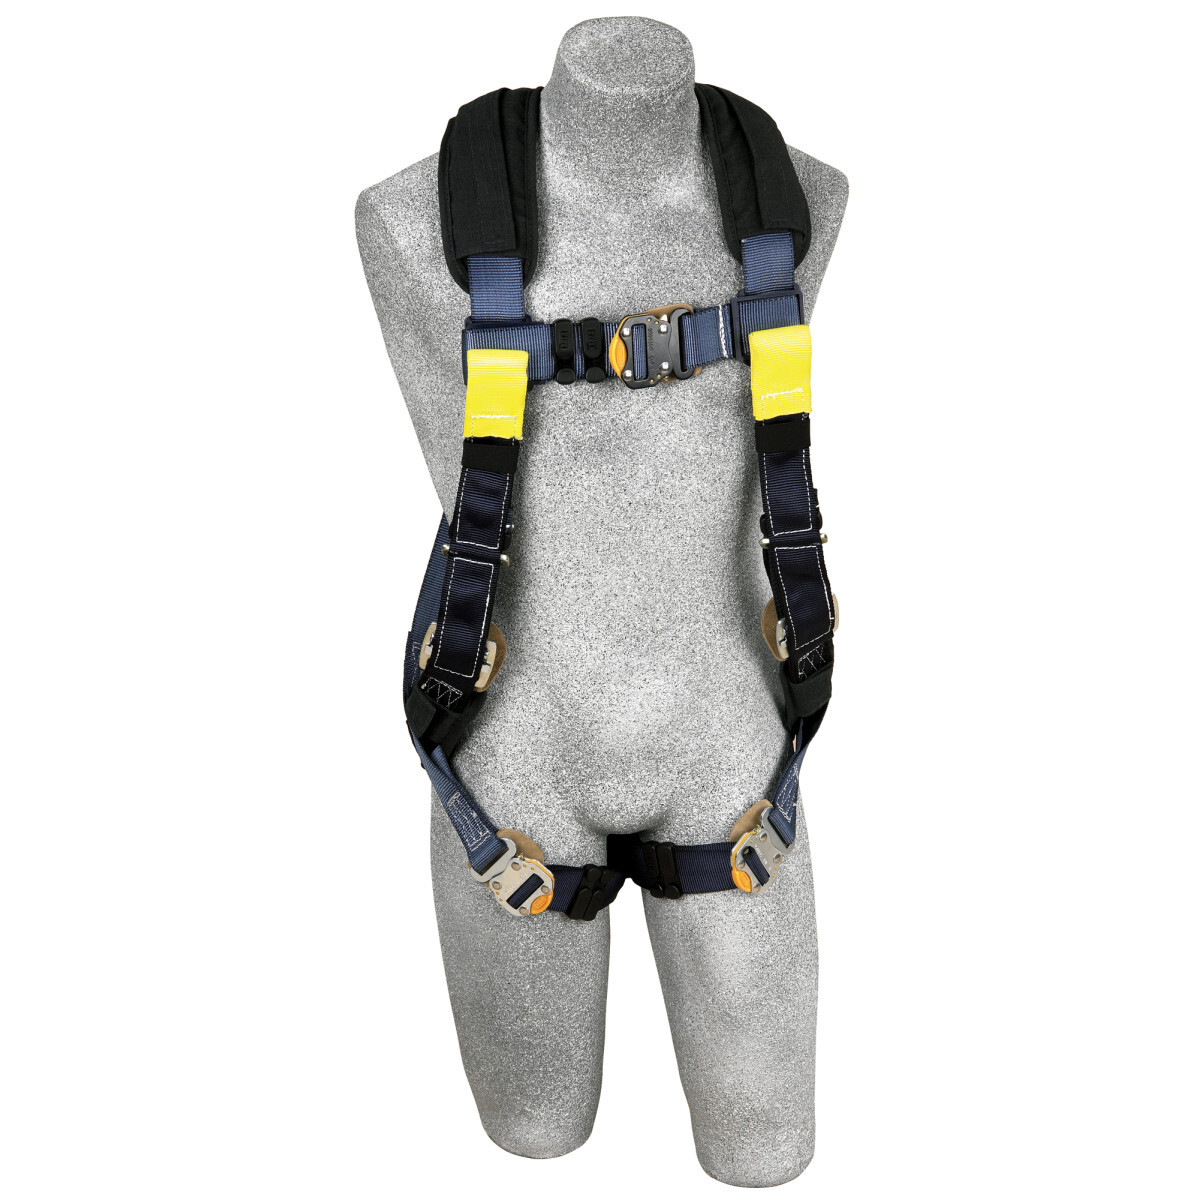 3M™ DBI-SALA® Large ExoFit™ XP Arc Flash Full Body/Vest Style Harness With Back And Front Web Rescue Loop, Quick Connect Chest A